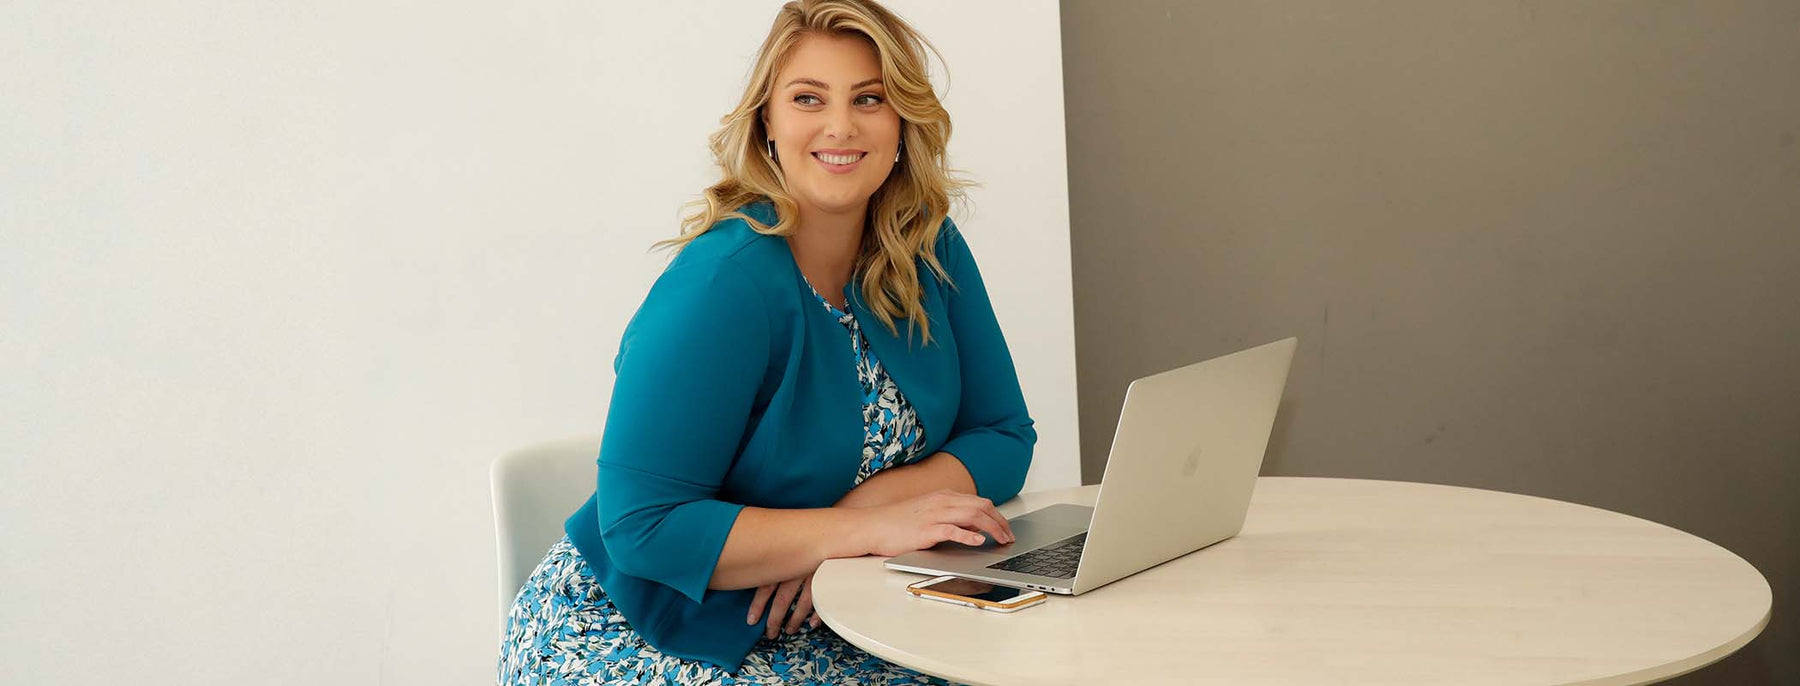 Plus size woman sitting at office desk wearing a printed jersey work dress with blue tailored jacket to show made in Australia corporate looks